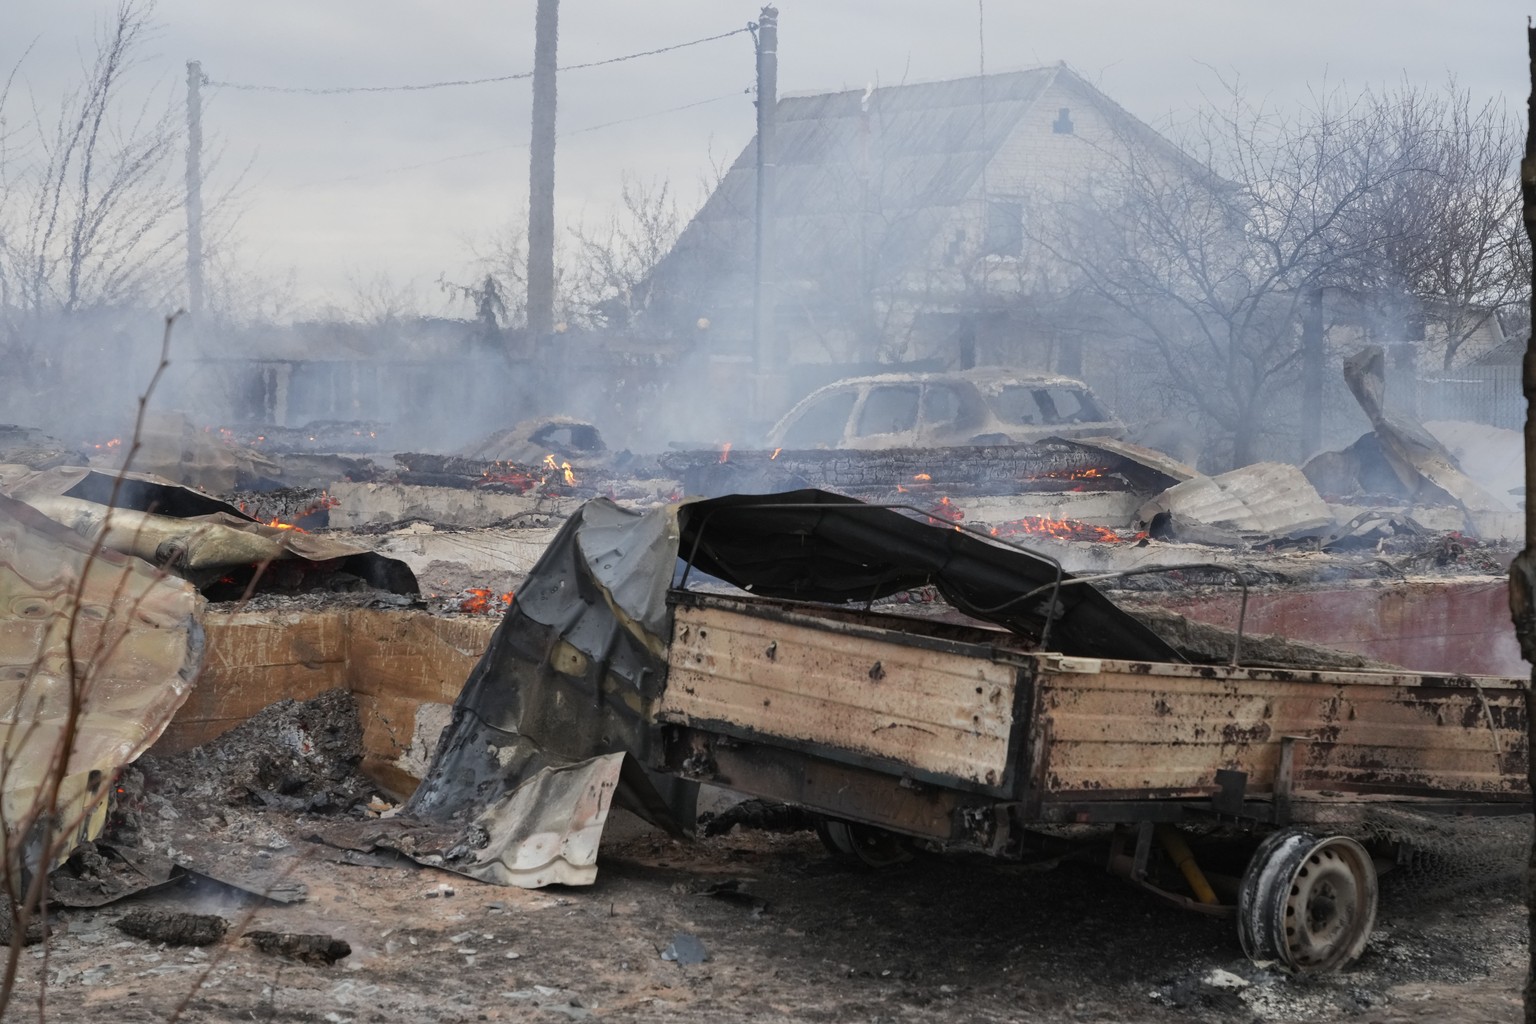 The debris of a privet house in the aftermath of Russian shelling outside Kyiv, Ukraine, Thursday, Feb. 24, 2022. Russia on Thursday unleashed a barrage of air and missile strikes on Ukrainian facilit ...